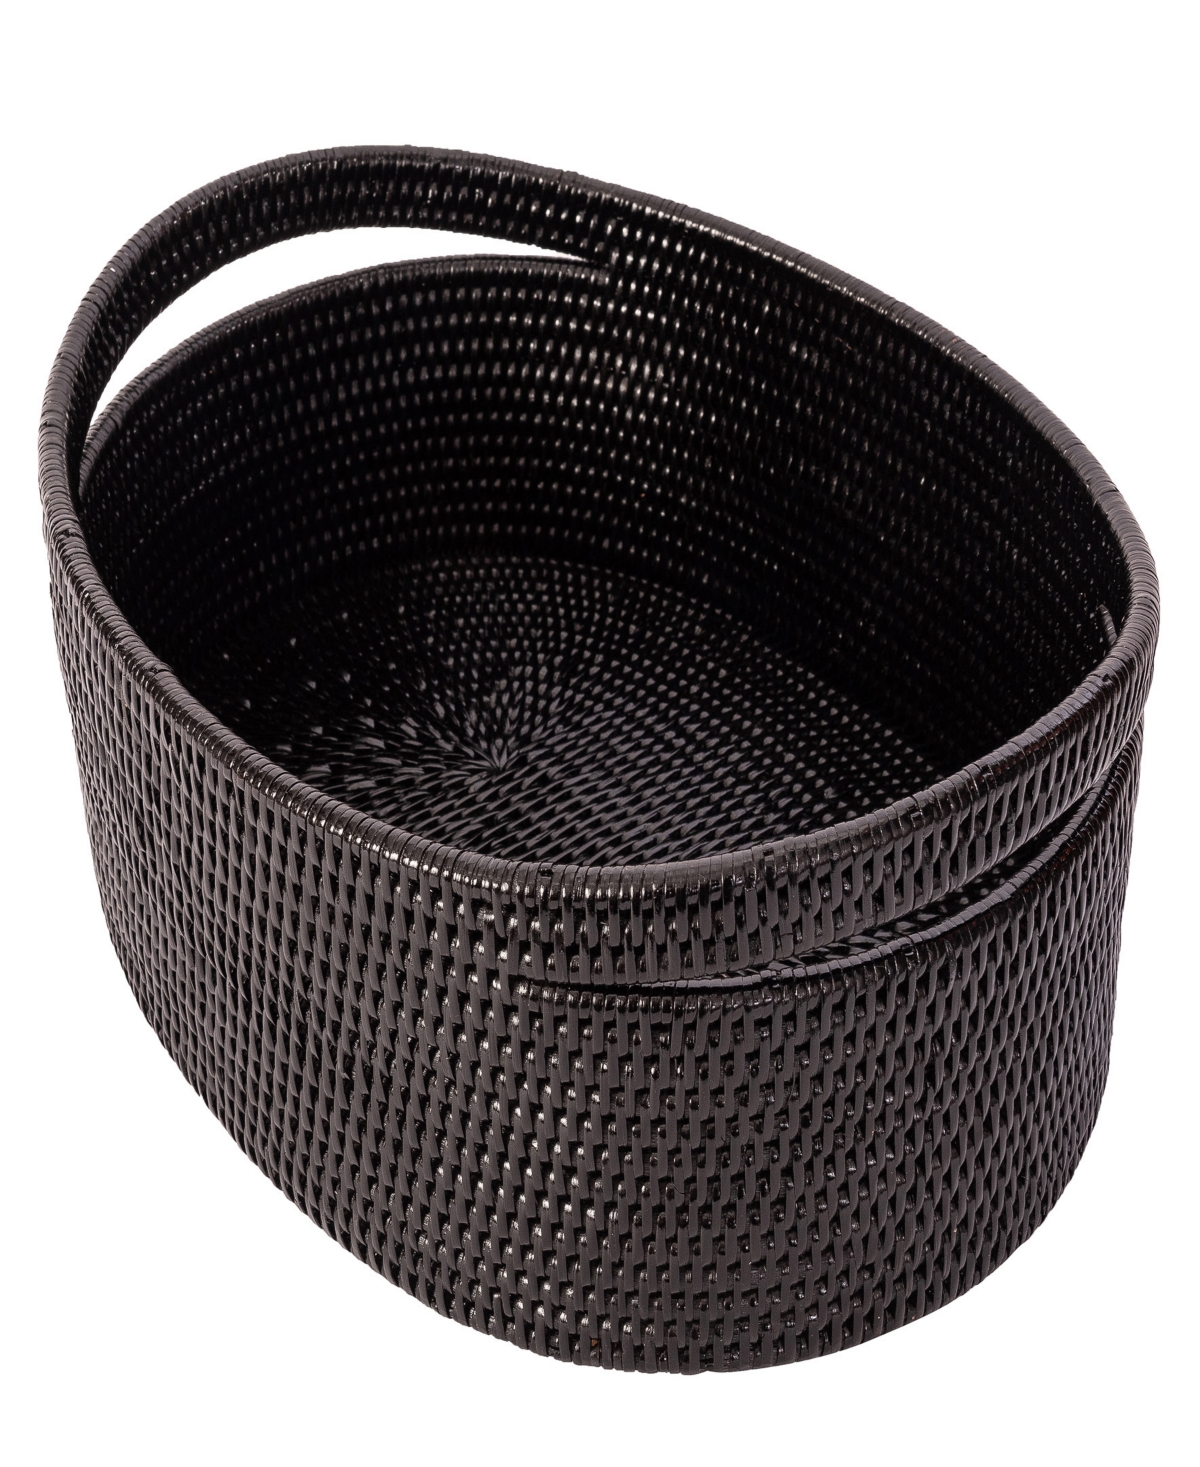 Shop Artifacts Trading Company Artifacts Rattan Oval Basket In Tudor Black